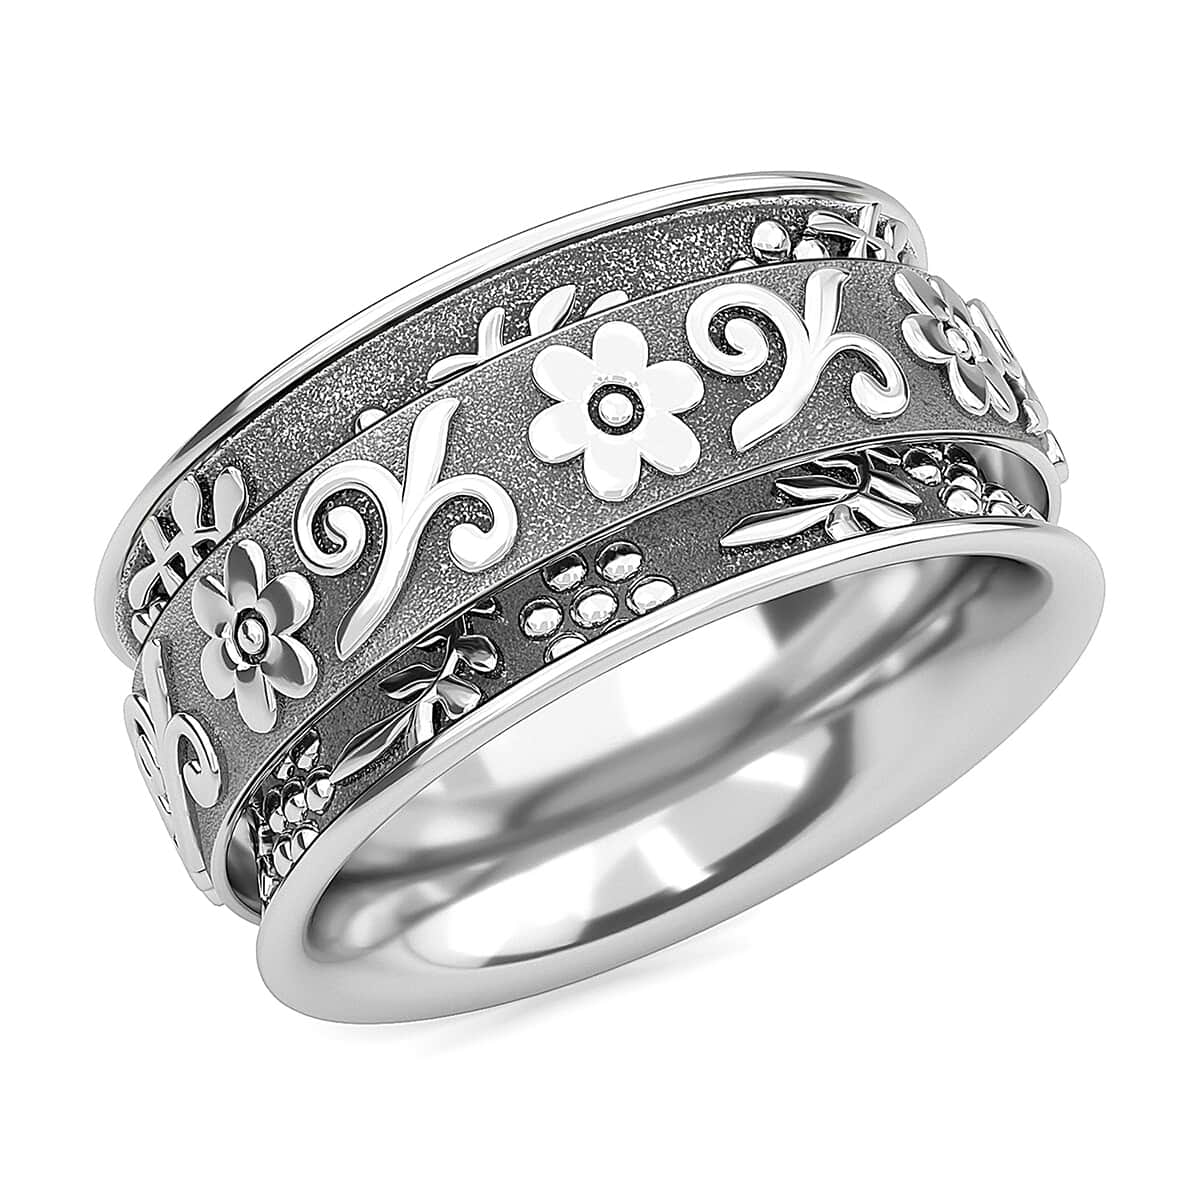 Artisan Crafted Sterling Silver Spinner Ring, Fidget Rings for Anxiety, Stress Relieving Anxiety Ring Band 4.25 g (Size 9) image number 0